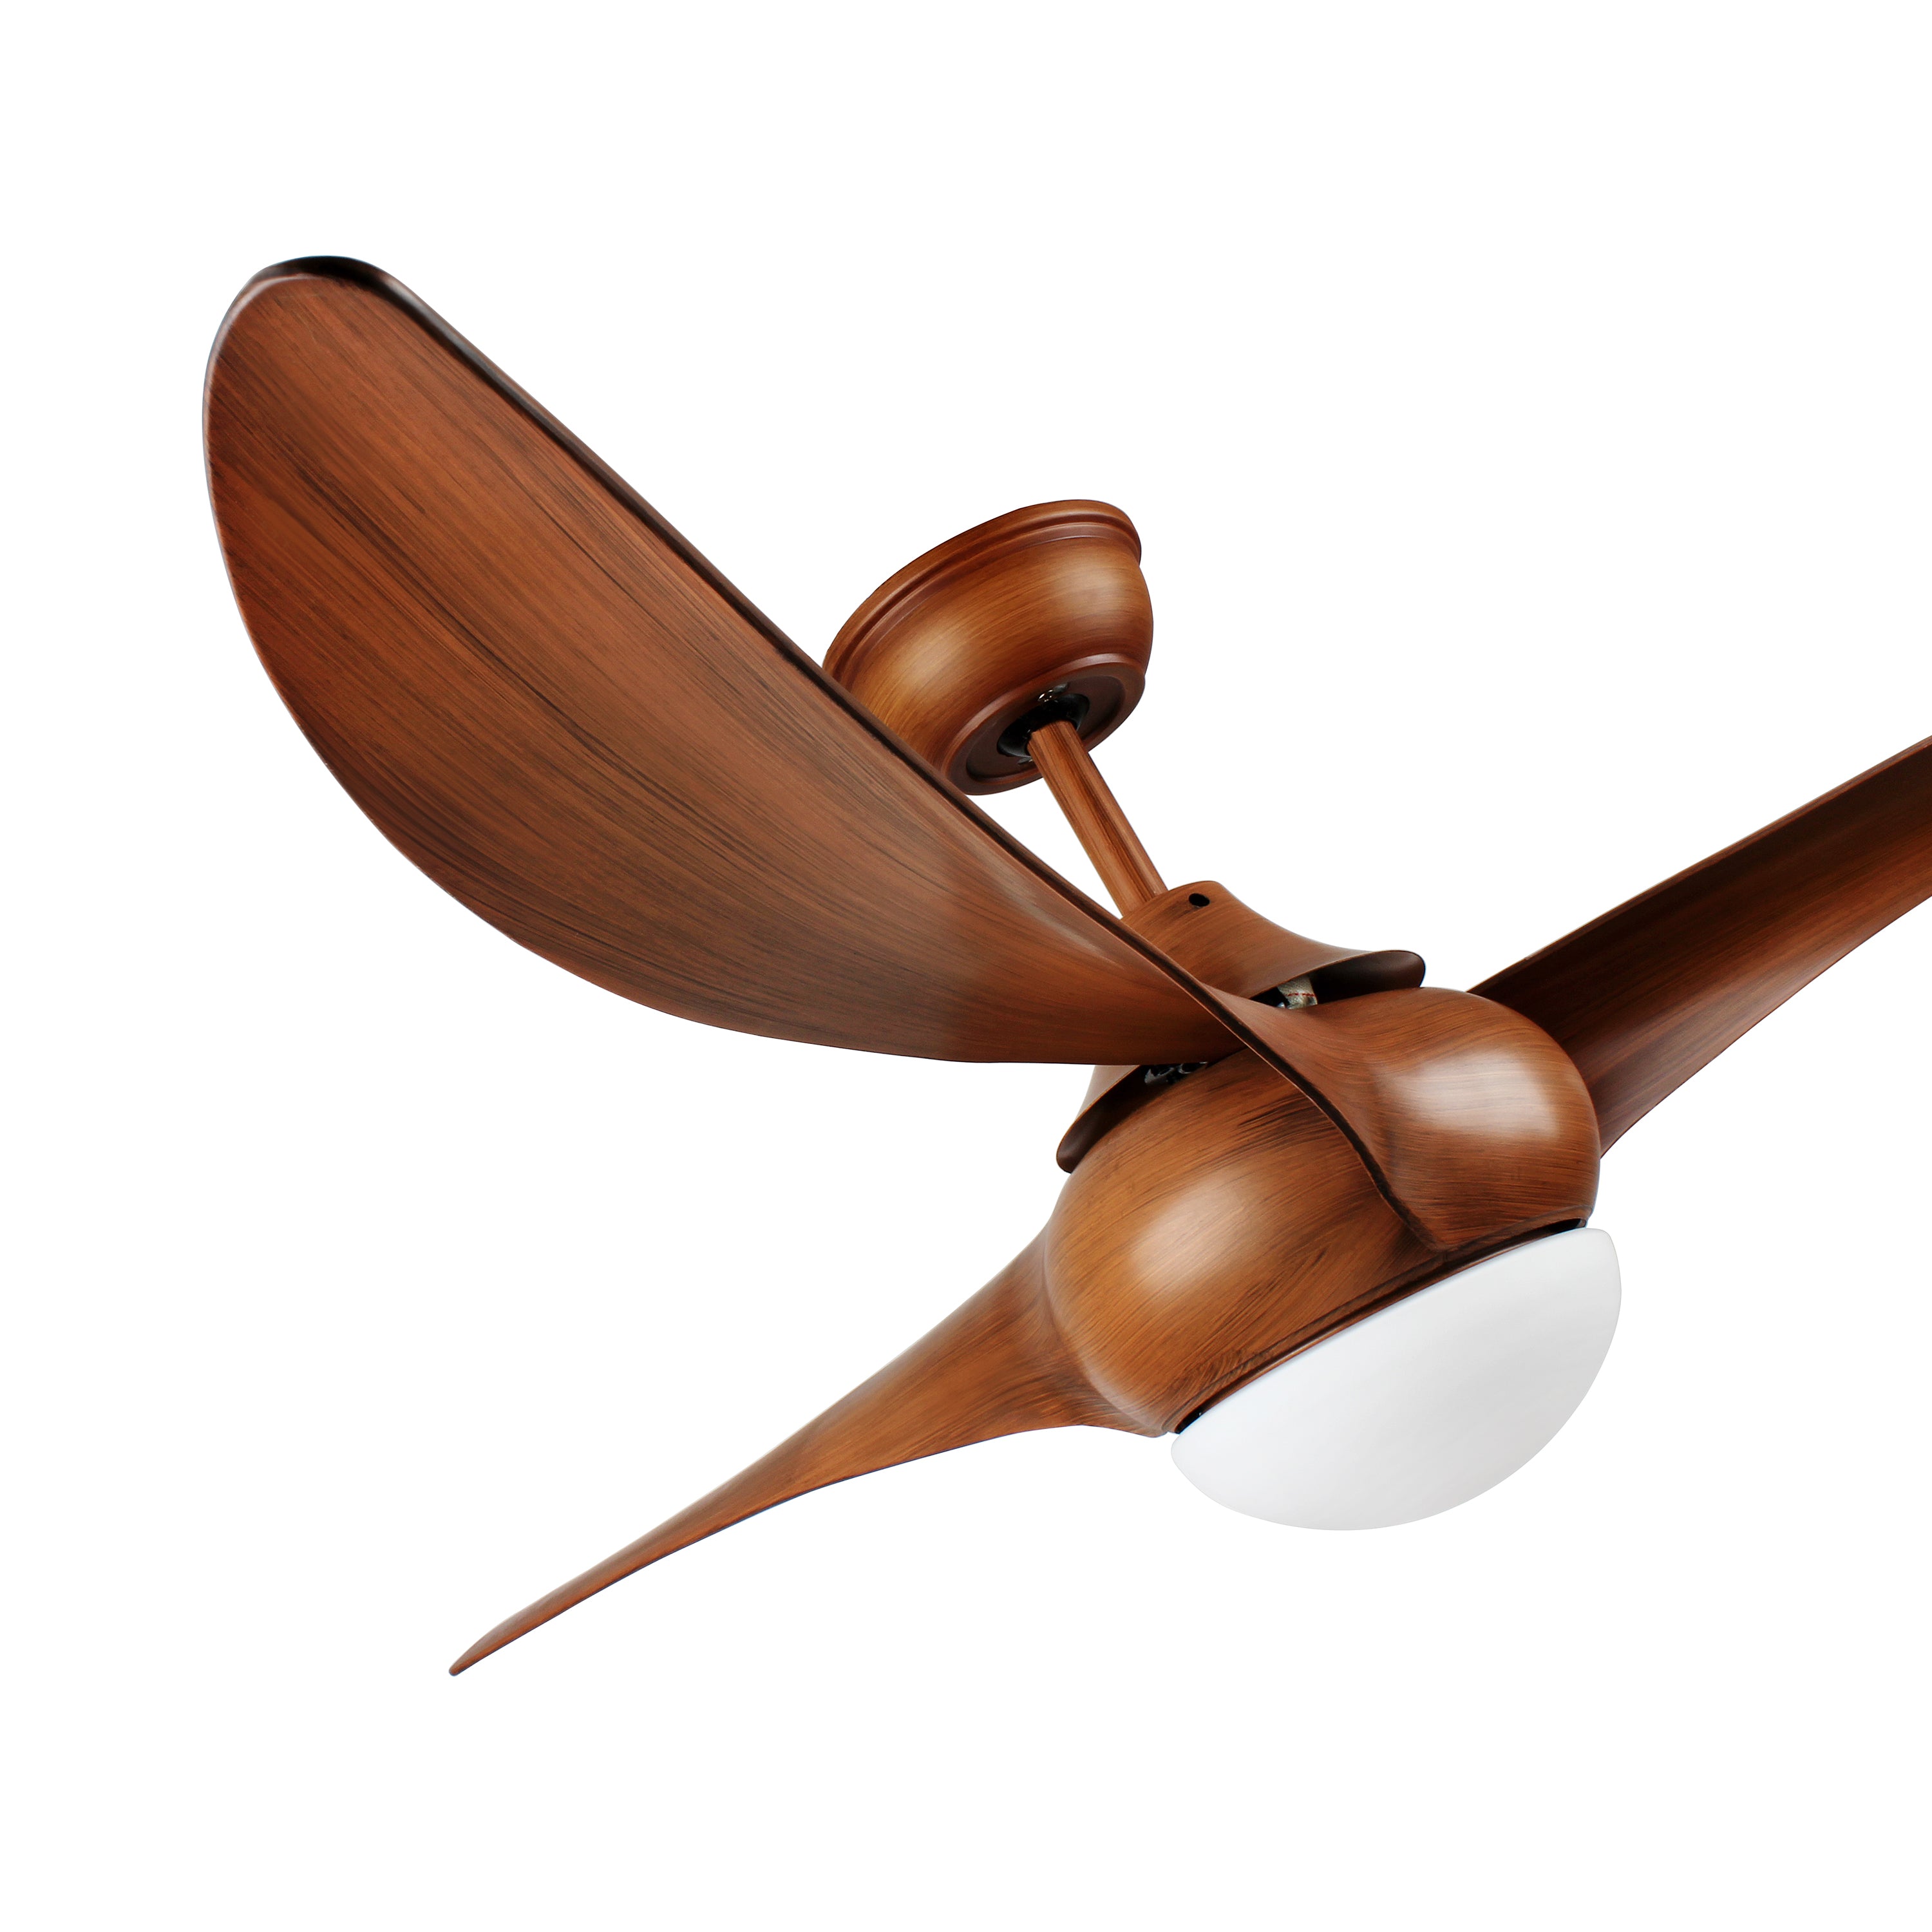 52 Inch Ceiling Fan with 3 Wooden Texture ABS Blades and LED Light.